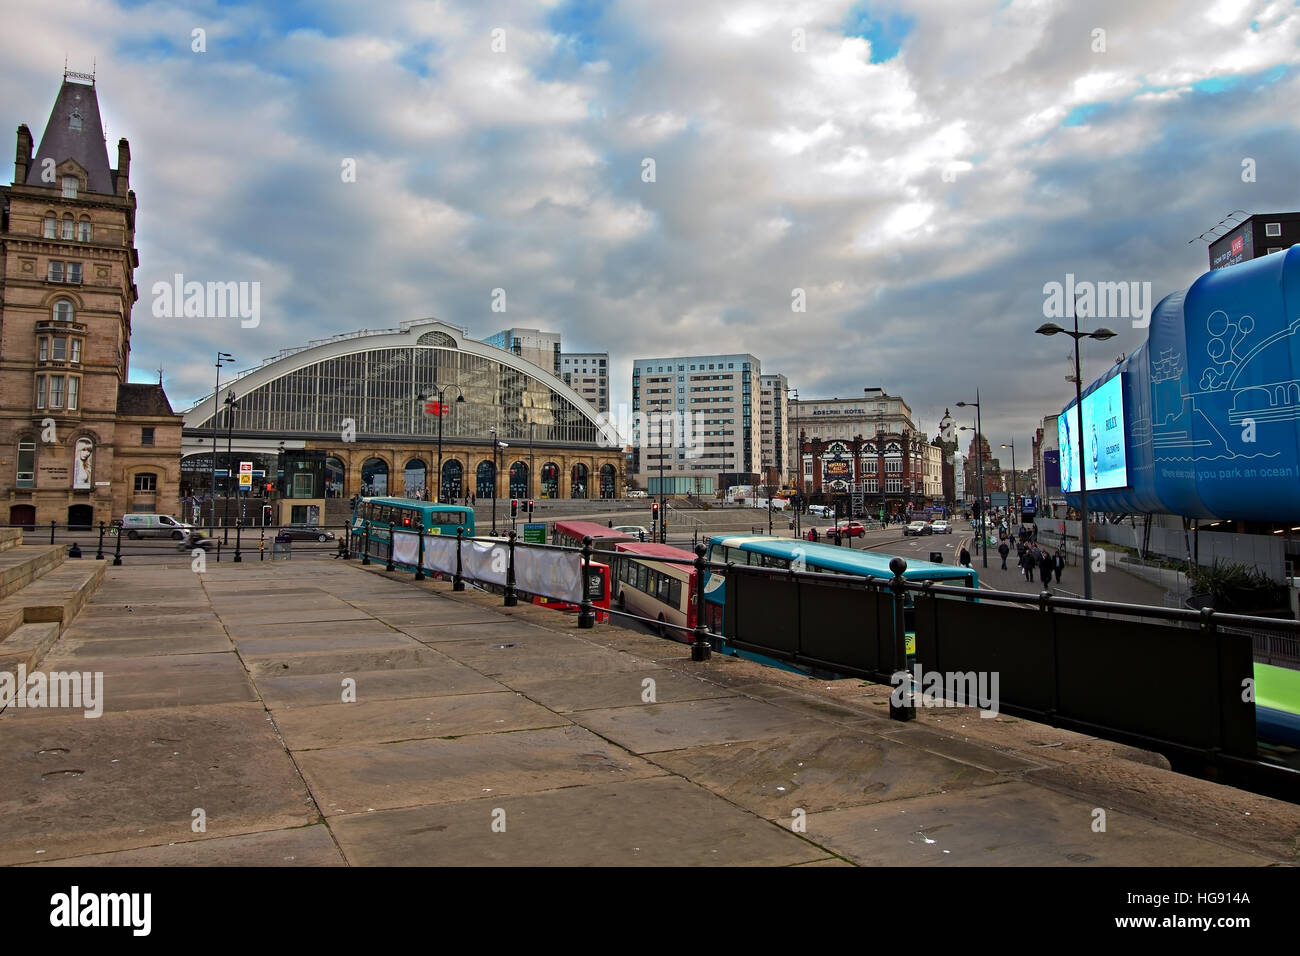 View of Lime St station Liverpool UK Stock Photo